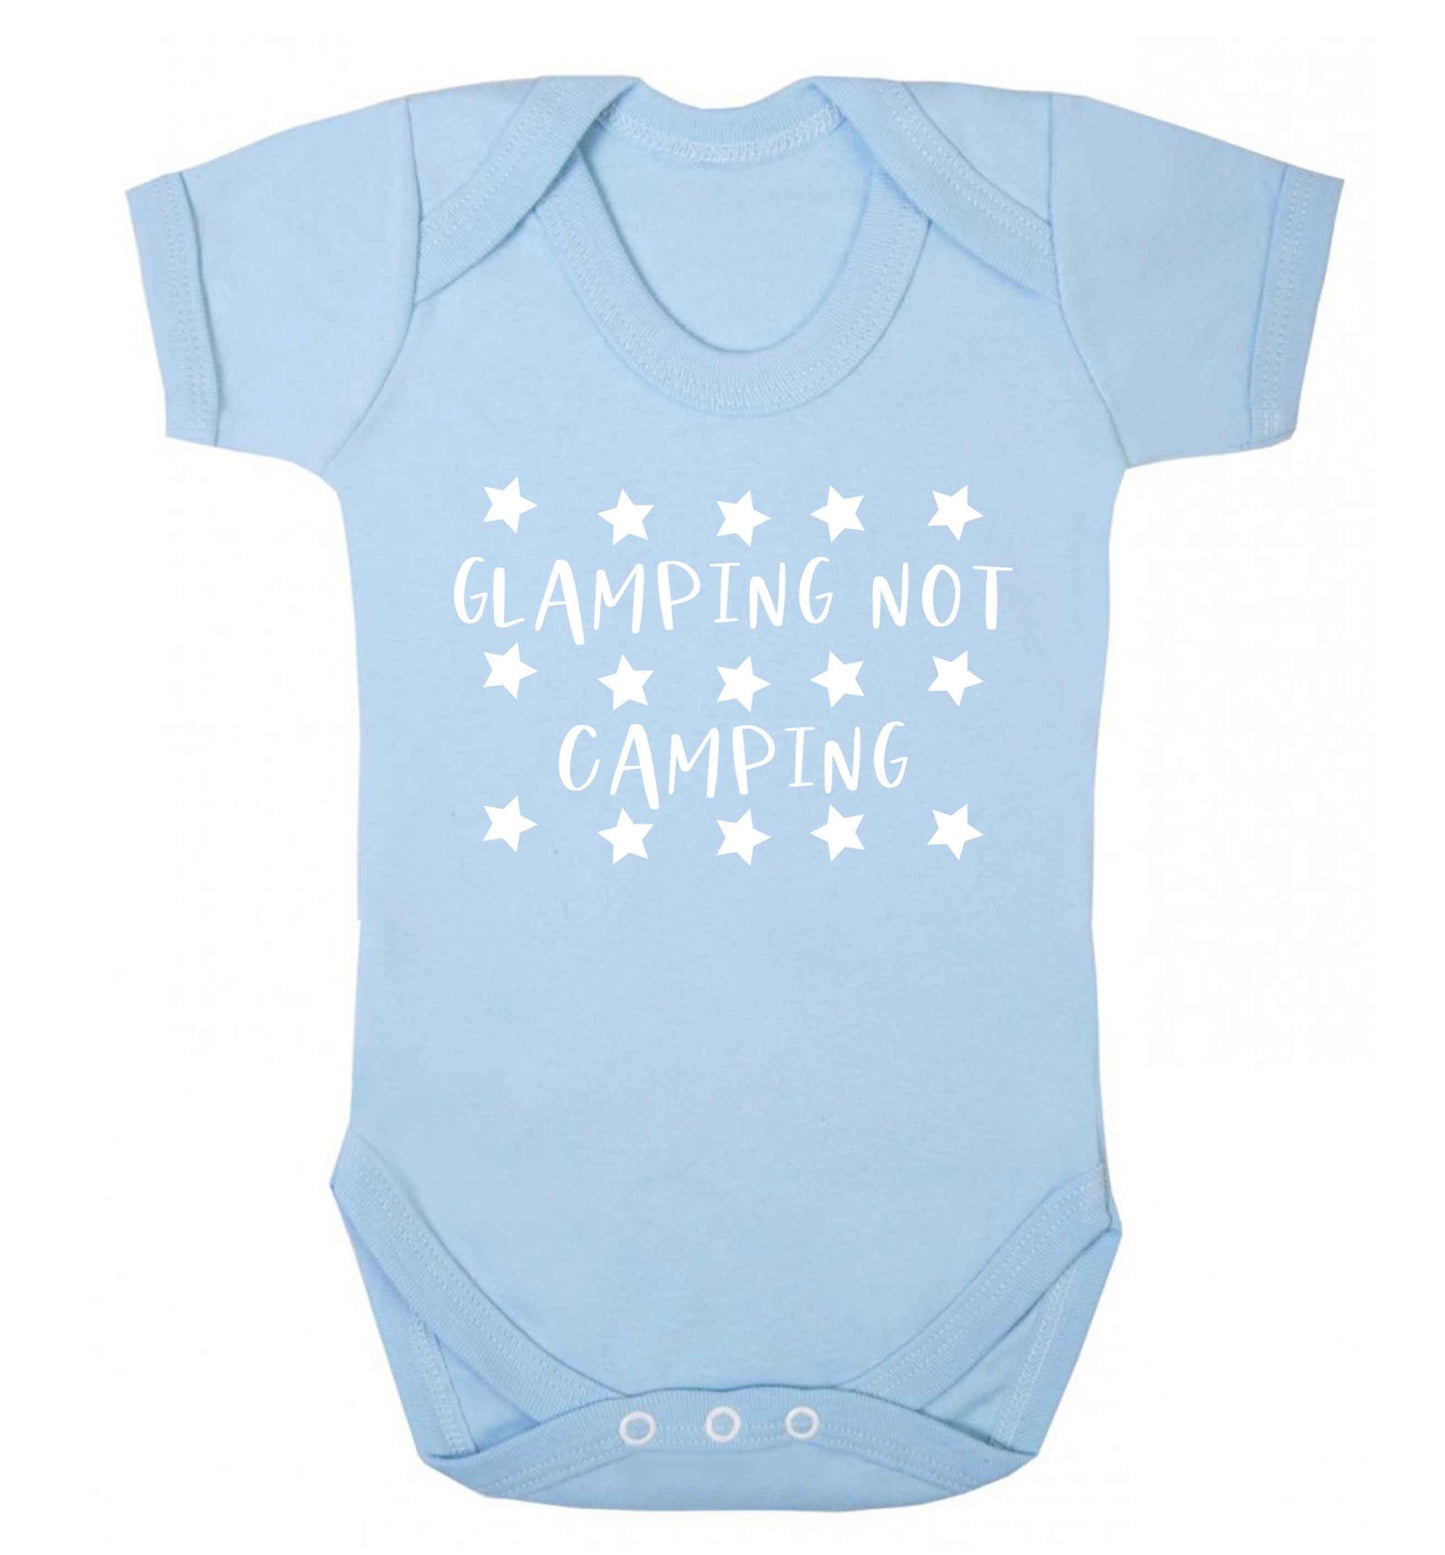 Glamping not camping Baby Vest pale blue 18-24 months